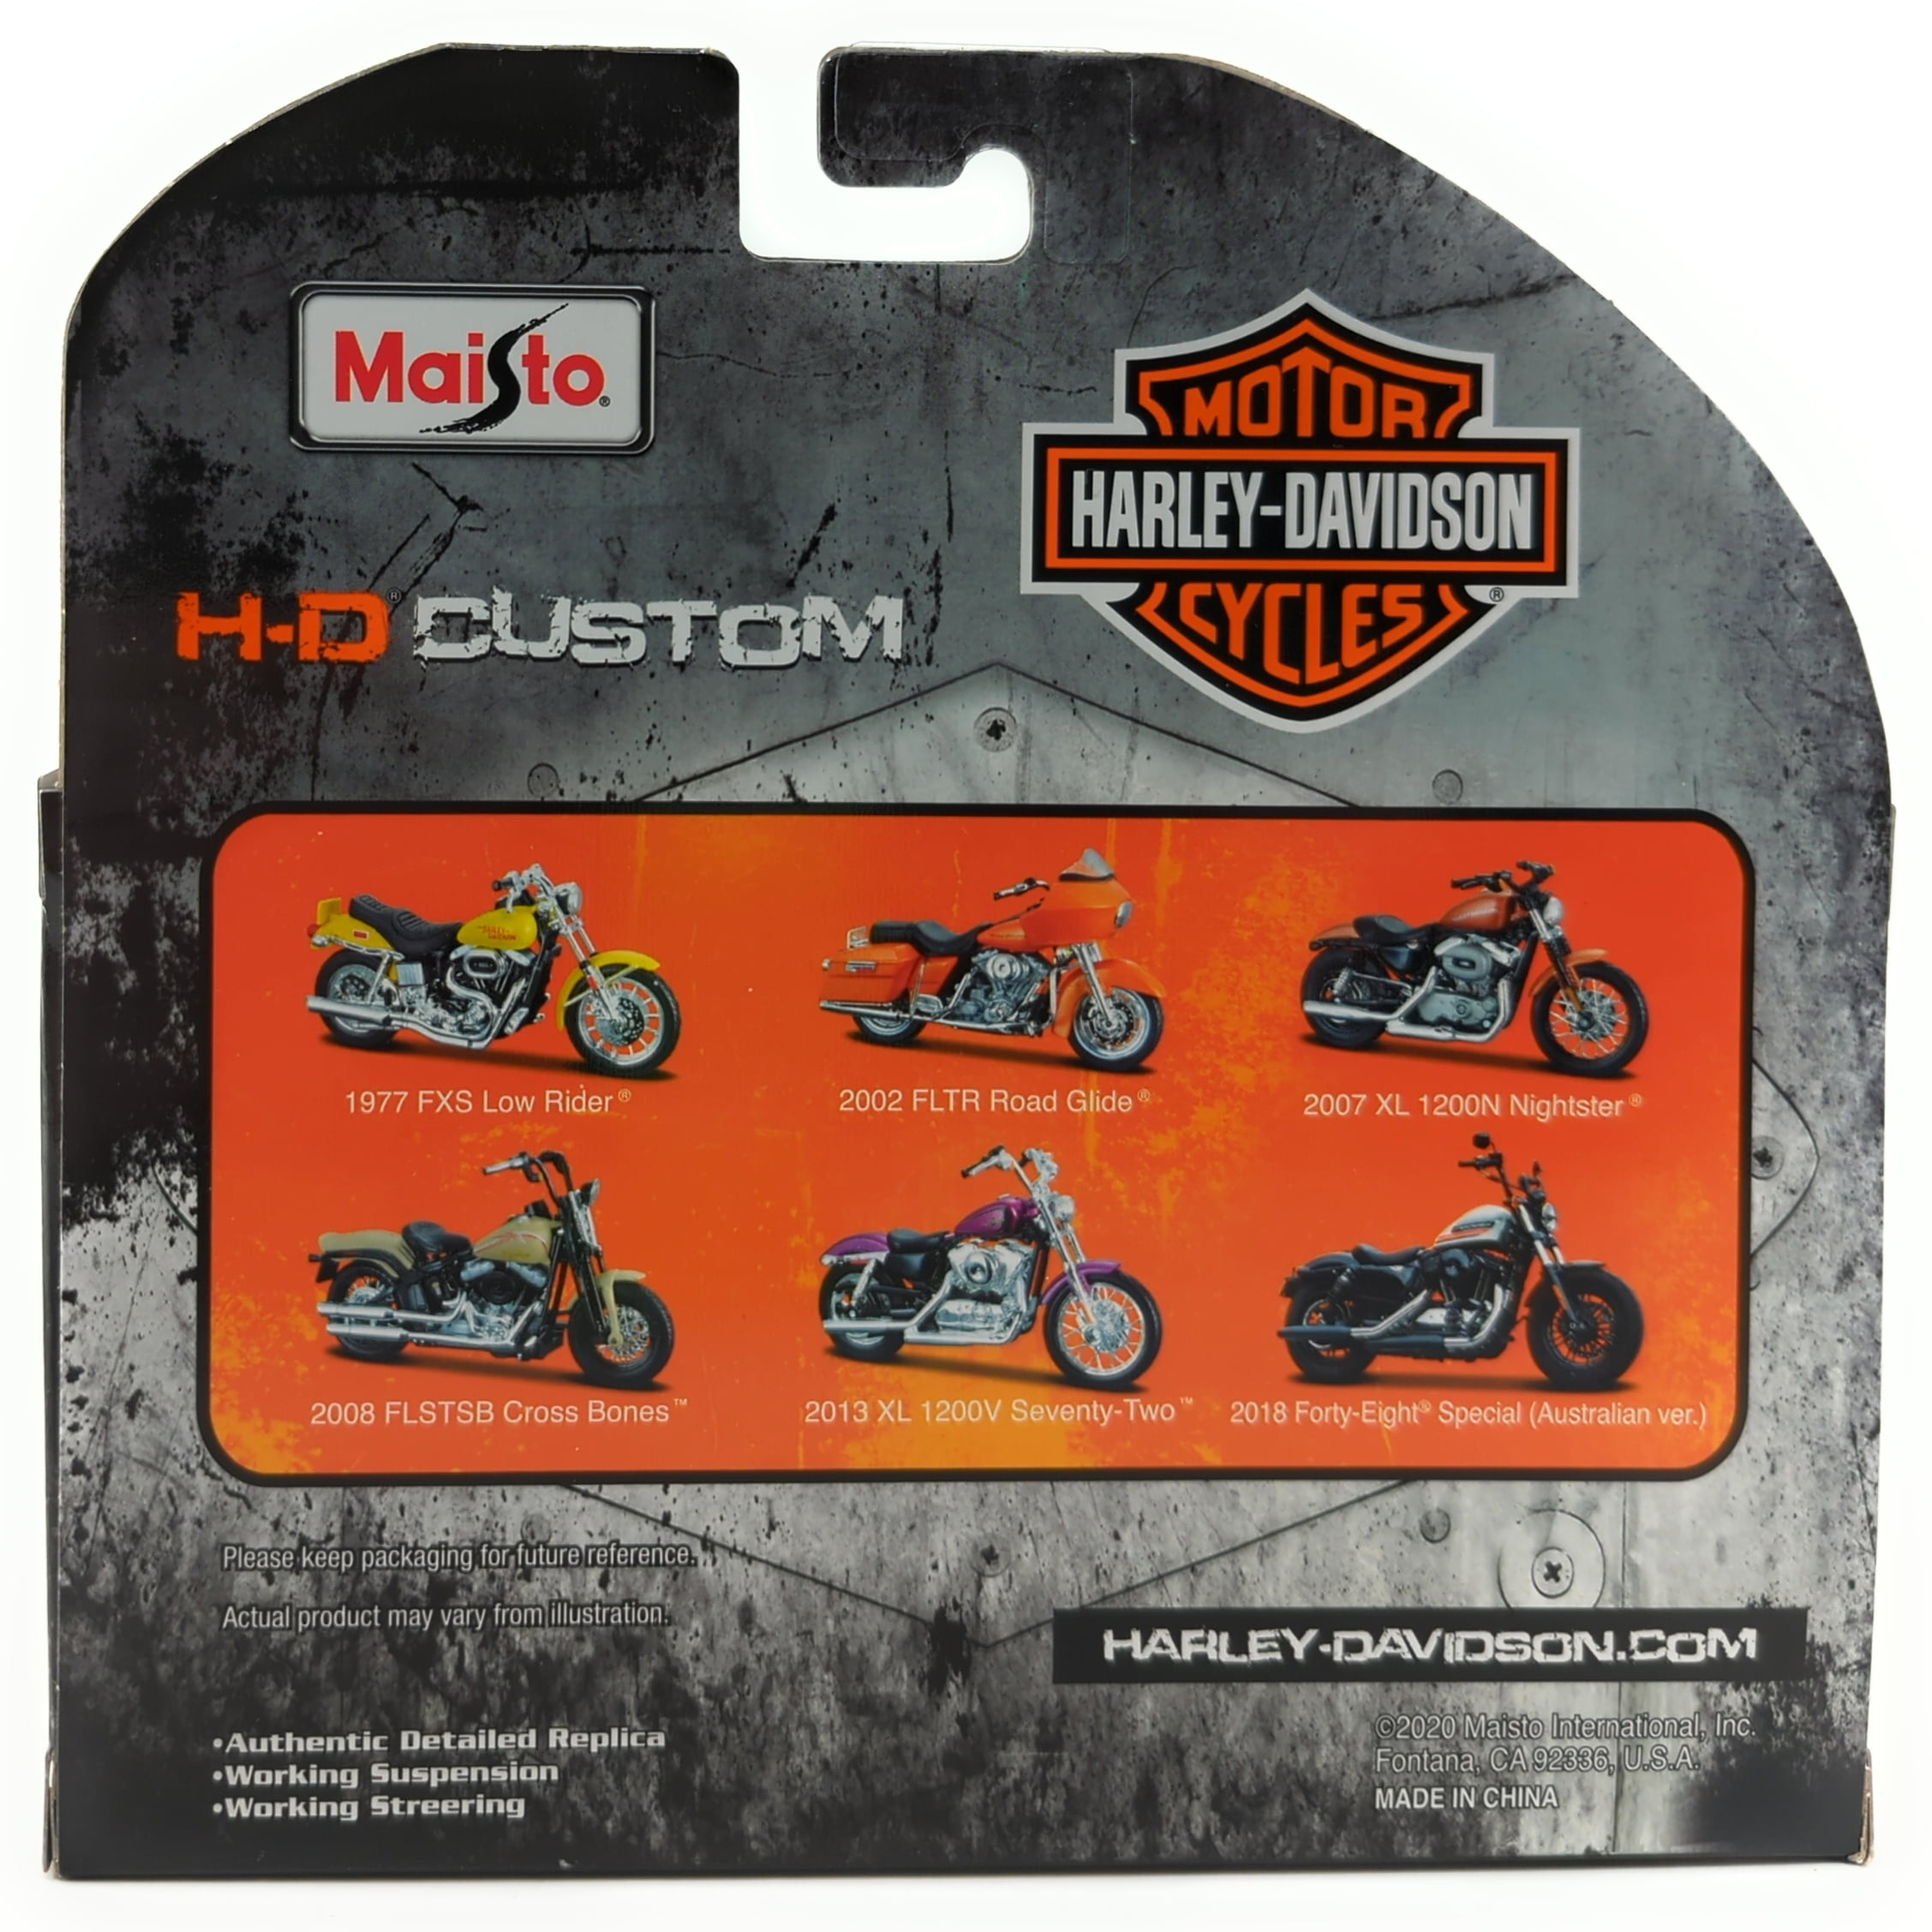 Maisto - Model Scale 1:18 Harley Davidson 2018 FORTY-EIGHT SPECIAL Aus. Ver. 